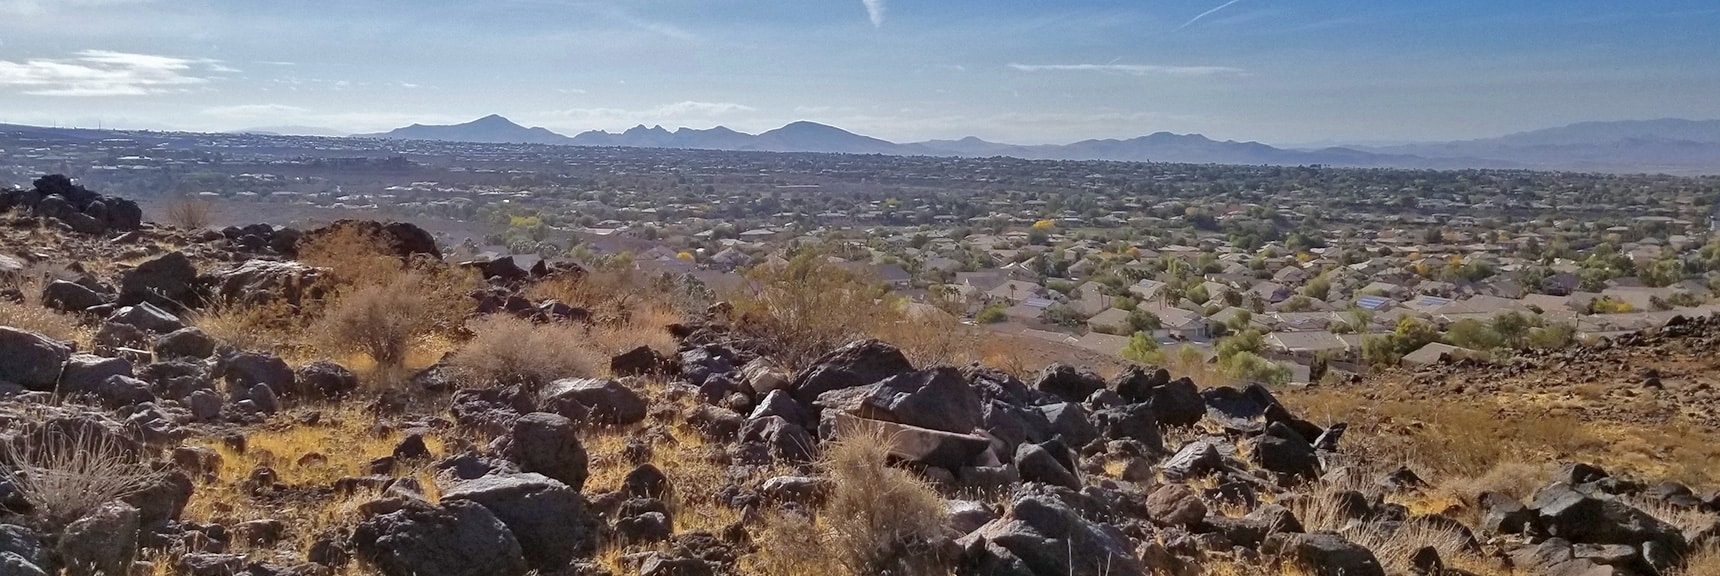 View South Down the Las Vegas Valley from Above Anthem | McCullough Hills Trail in Sloan Canyon National Conservation Area, Nevada